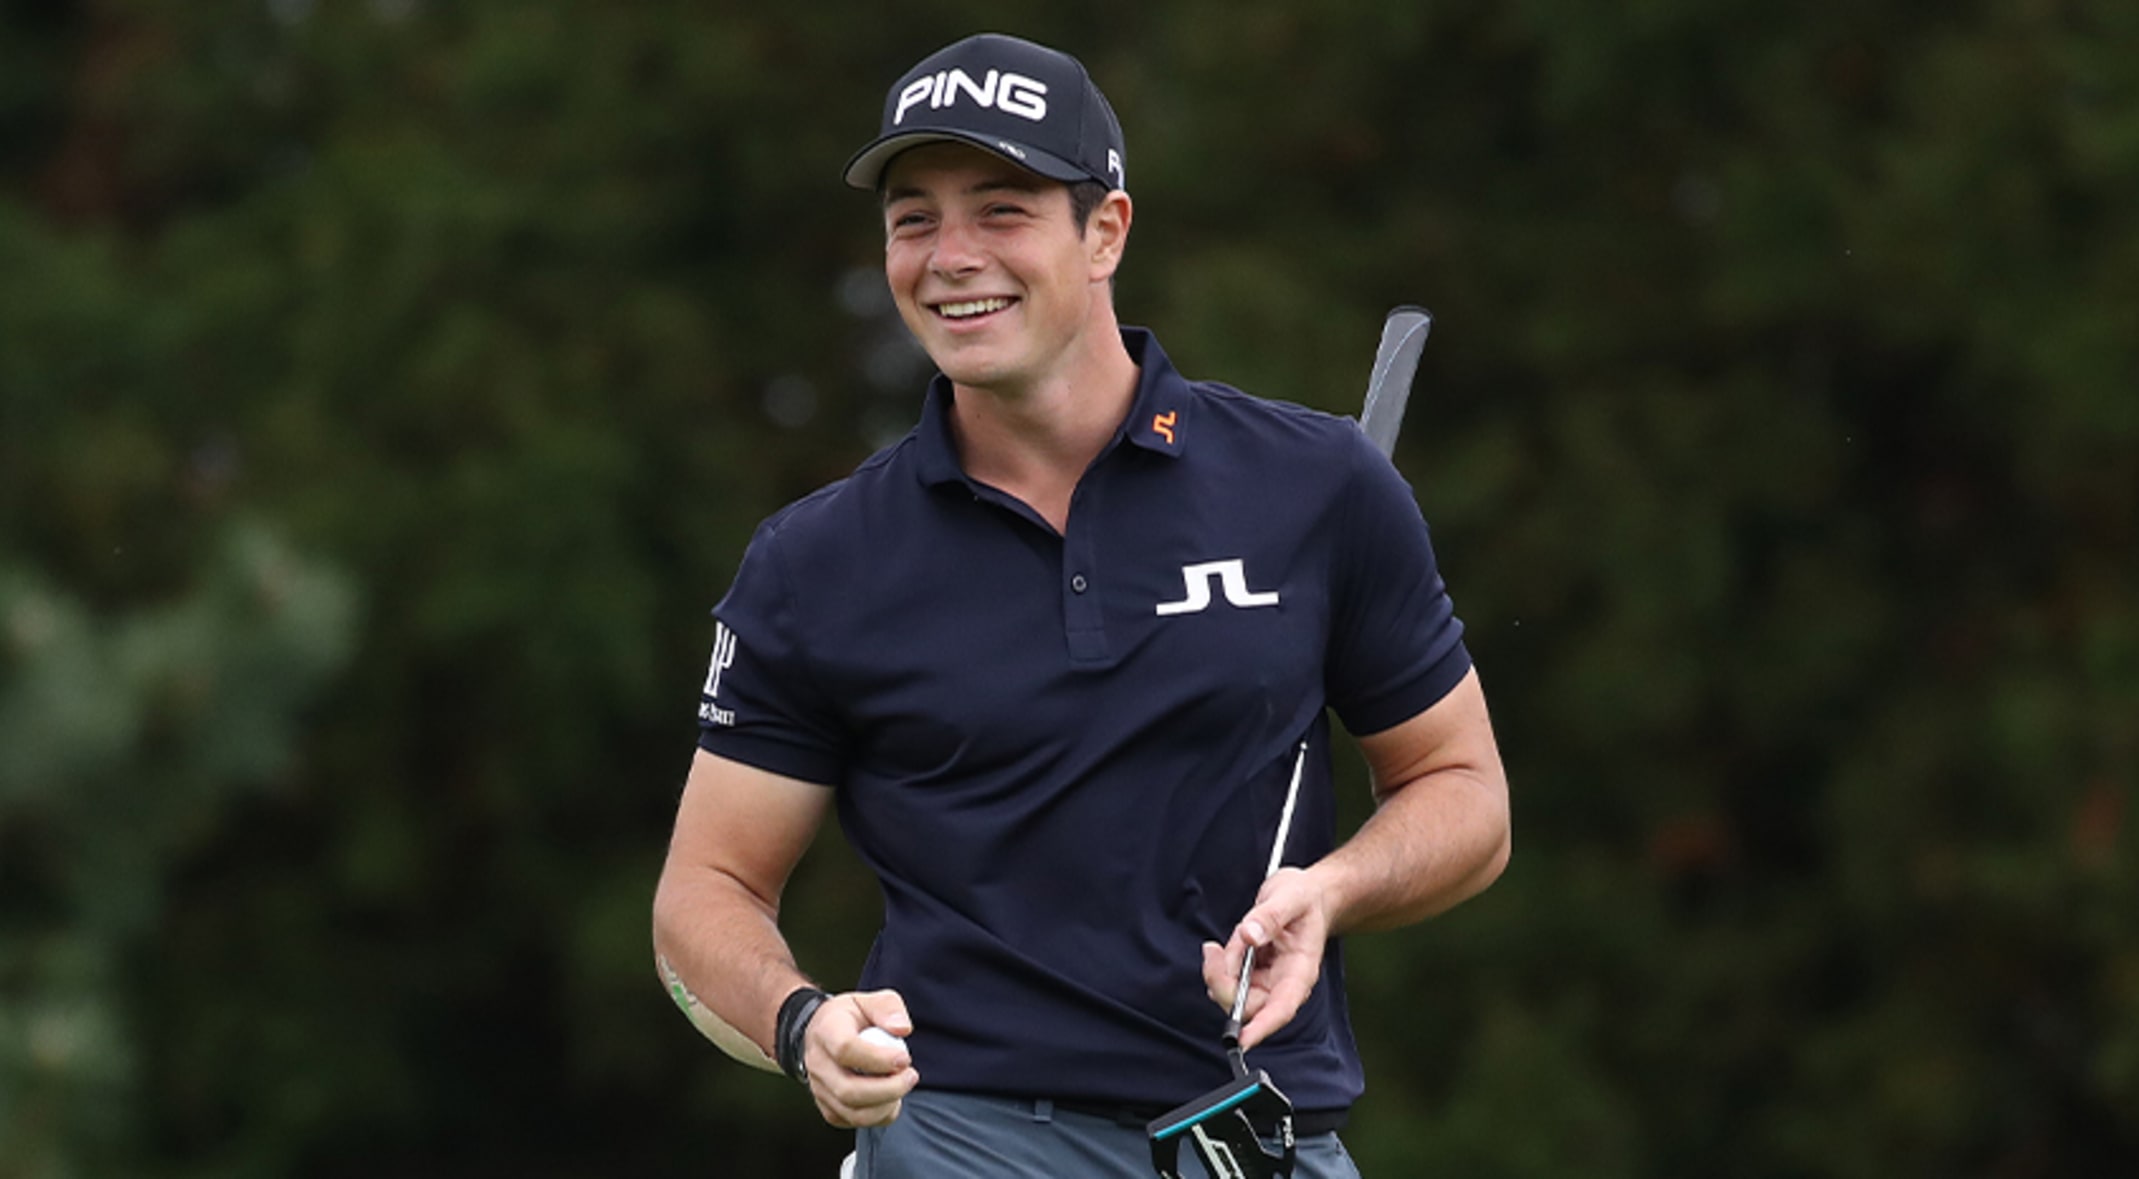 selvmord Milestone smugling Norwegian Rookie Viktor Hovland Takes Home Norway's First PGA Win - Swedes  in the States